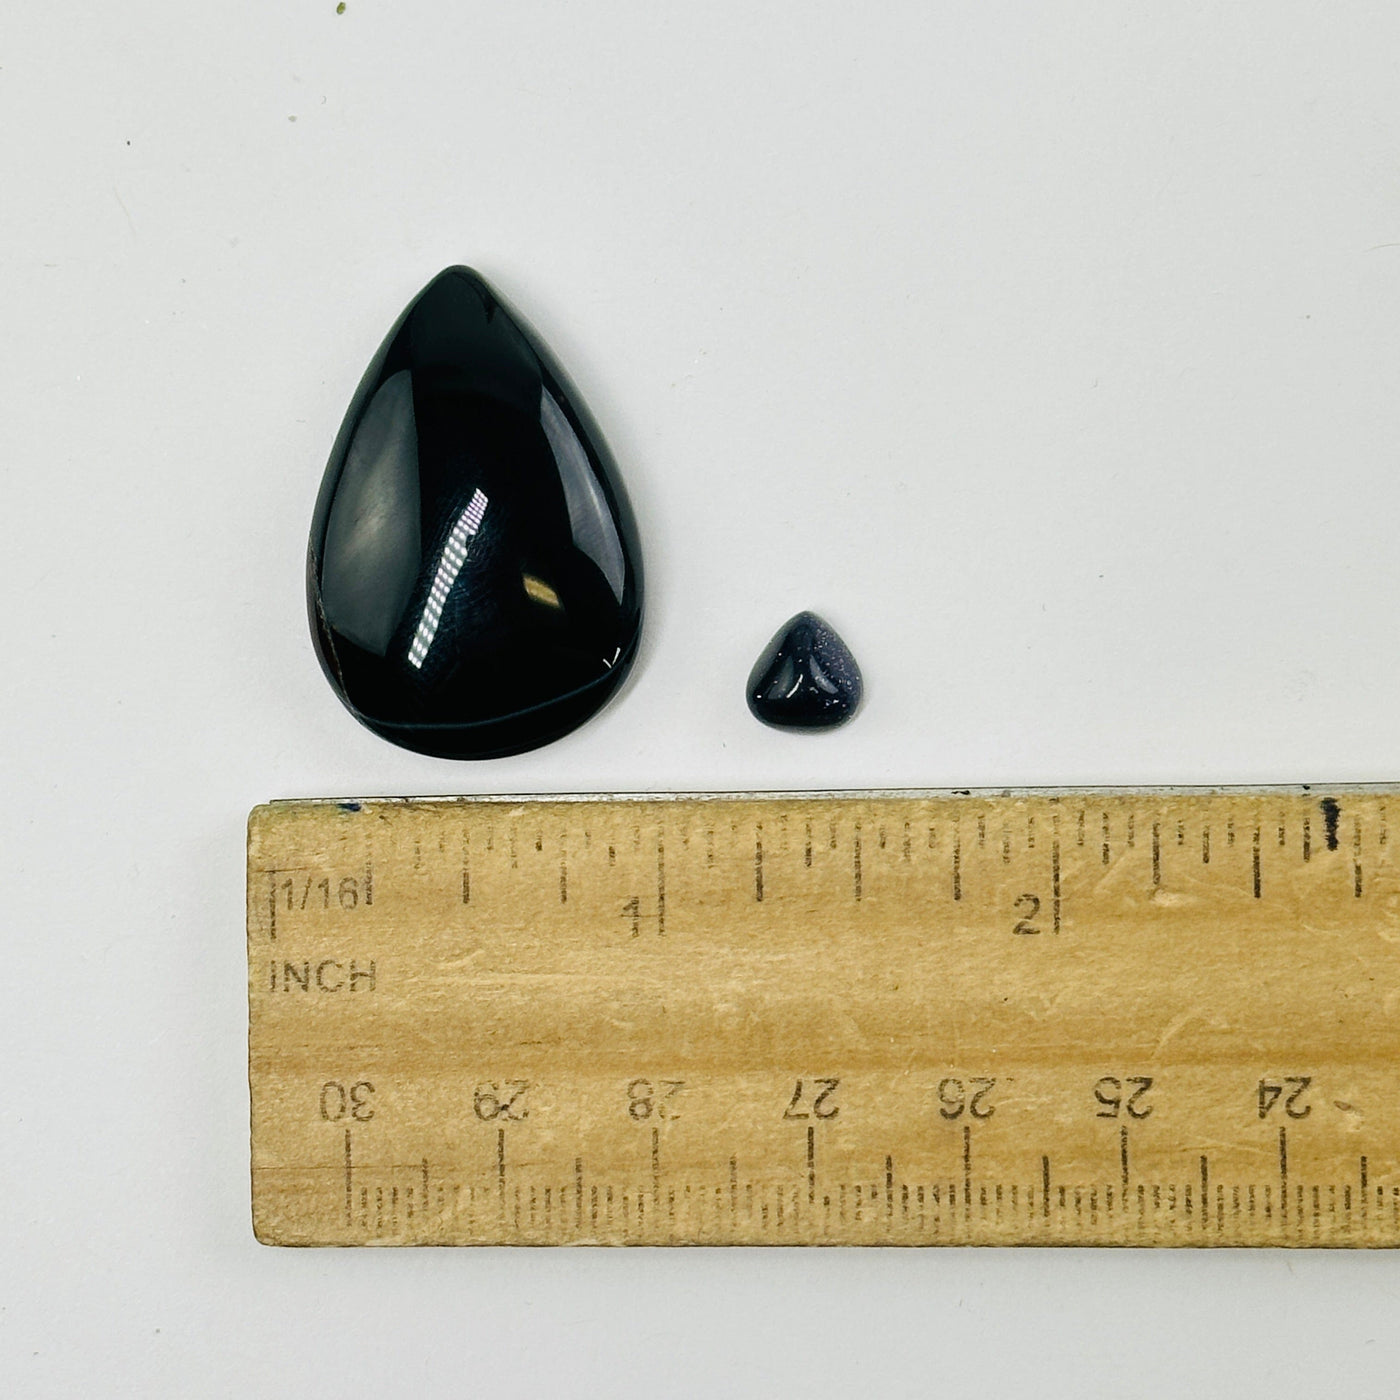 black stone cabochons next to a ruler for size reference